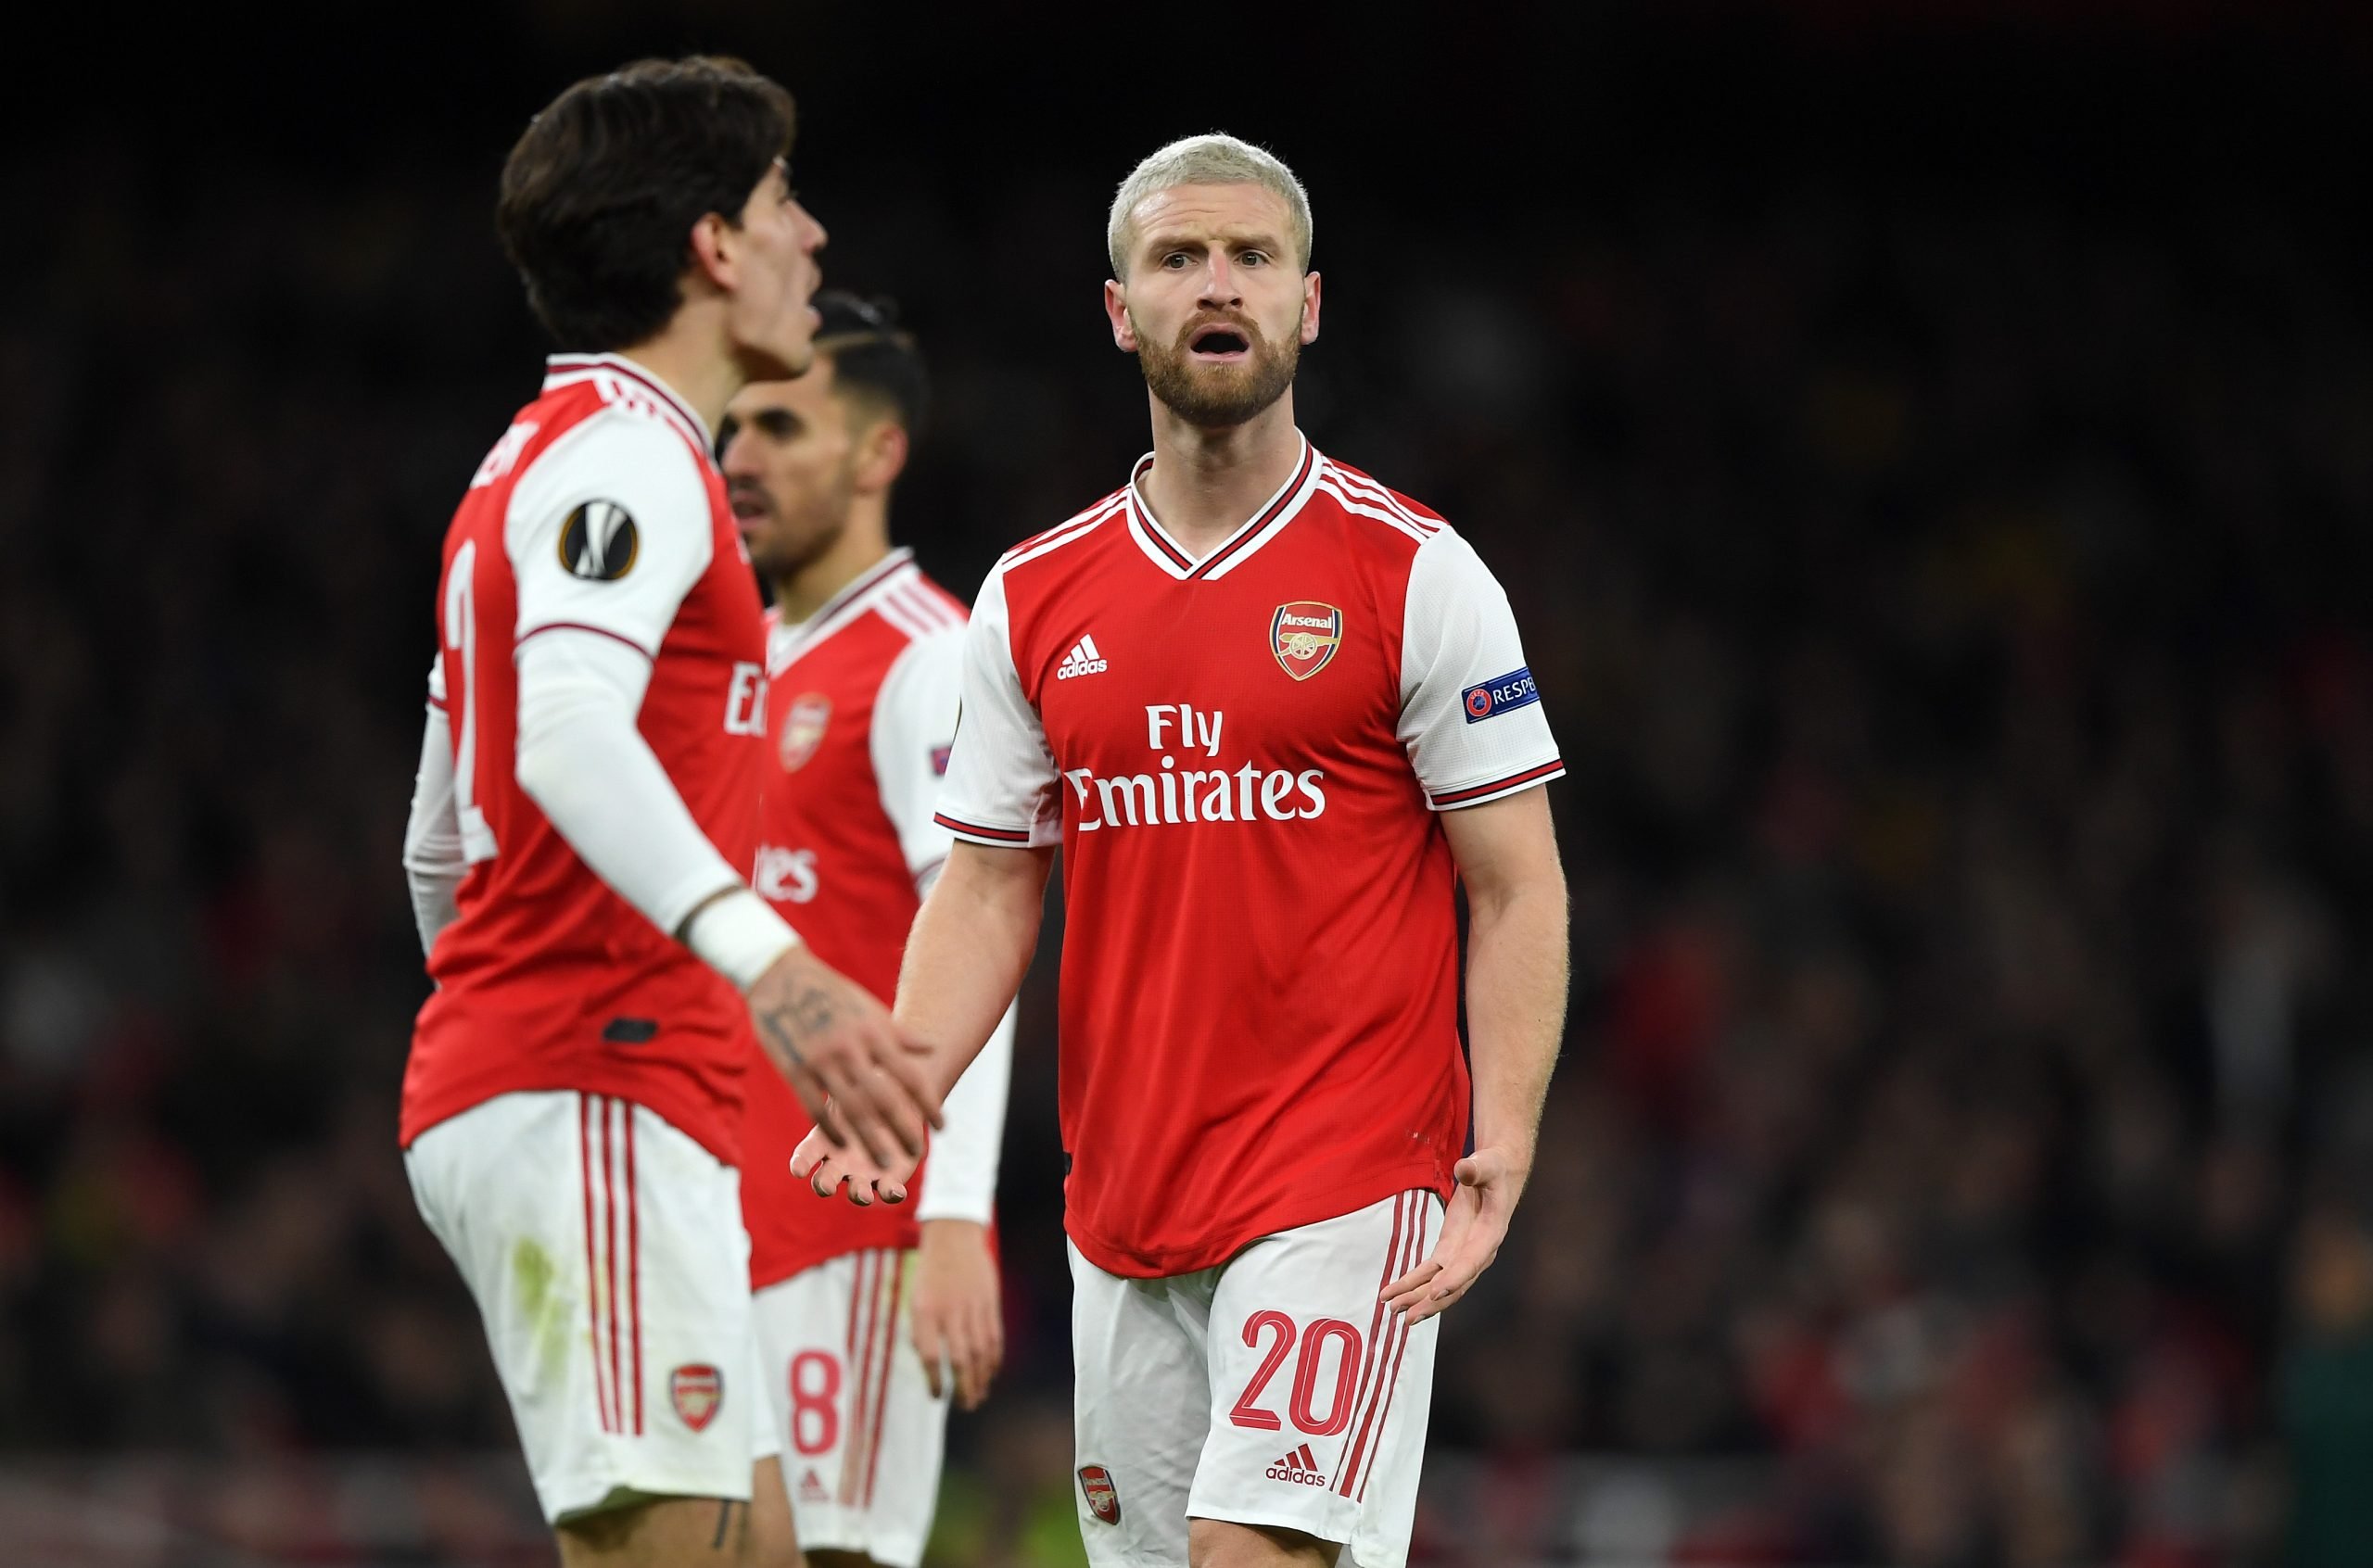 Barcelona could make a move for Shkodran Mustafi - He is not valued member of the team anymore.